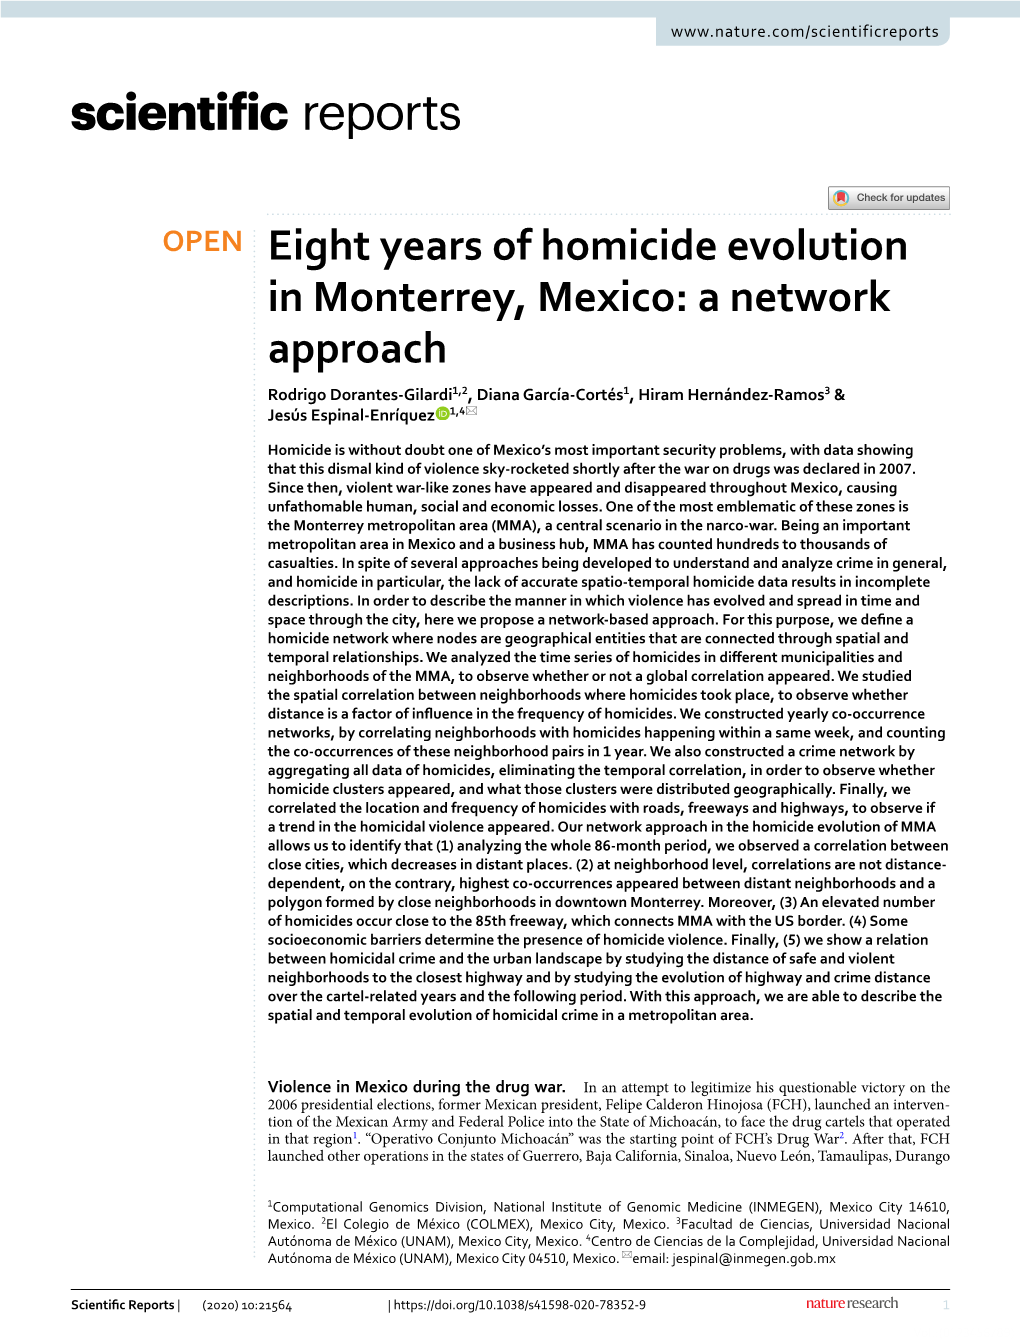 Eight Years of Homicide Evolution in Monterrey, Mexico